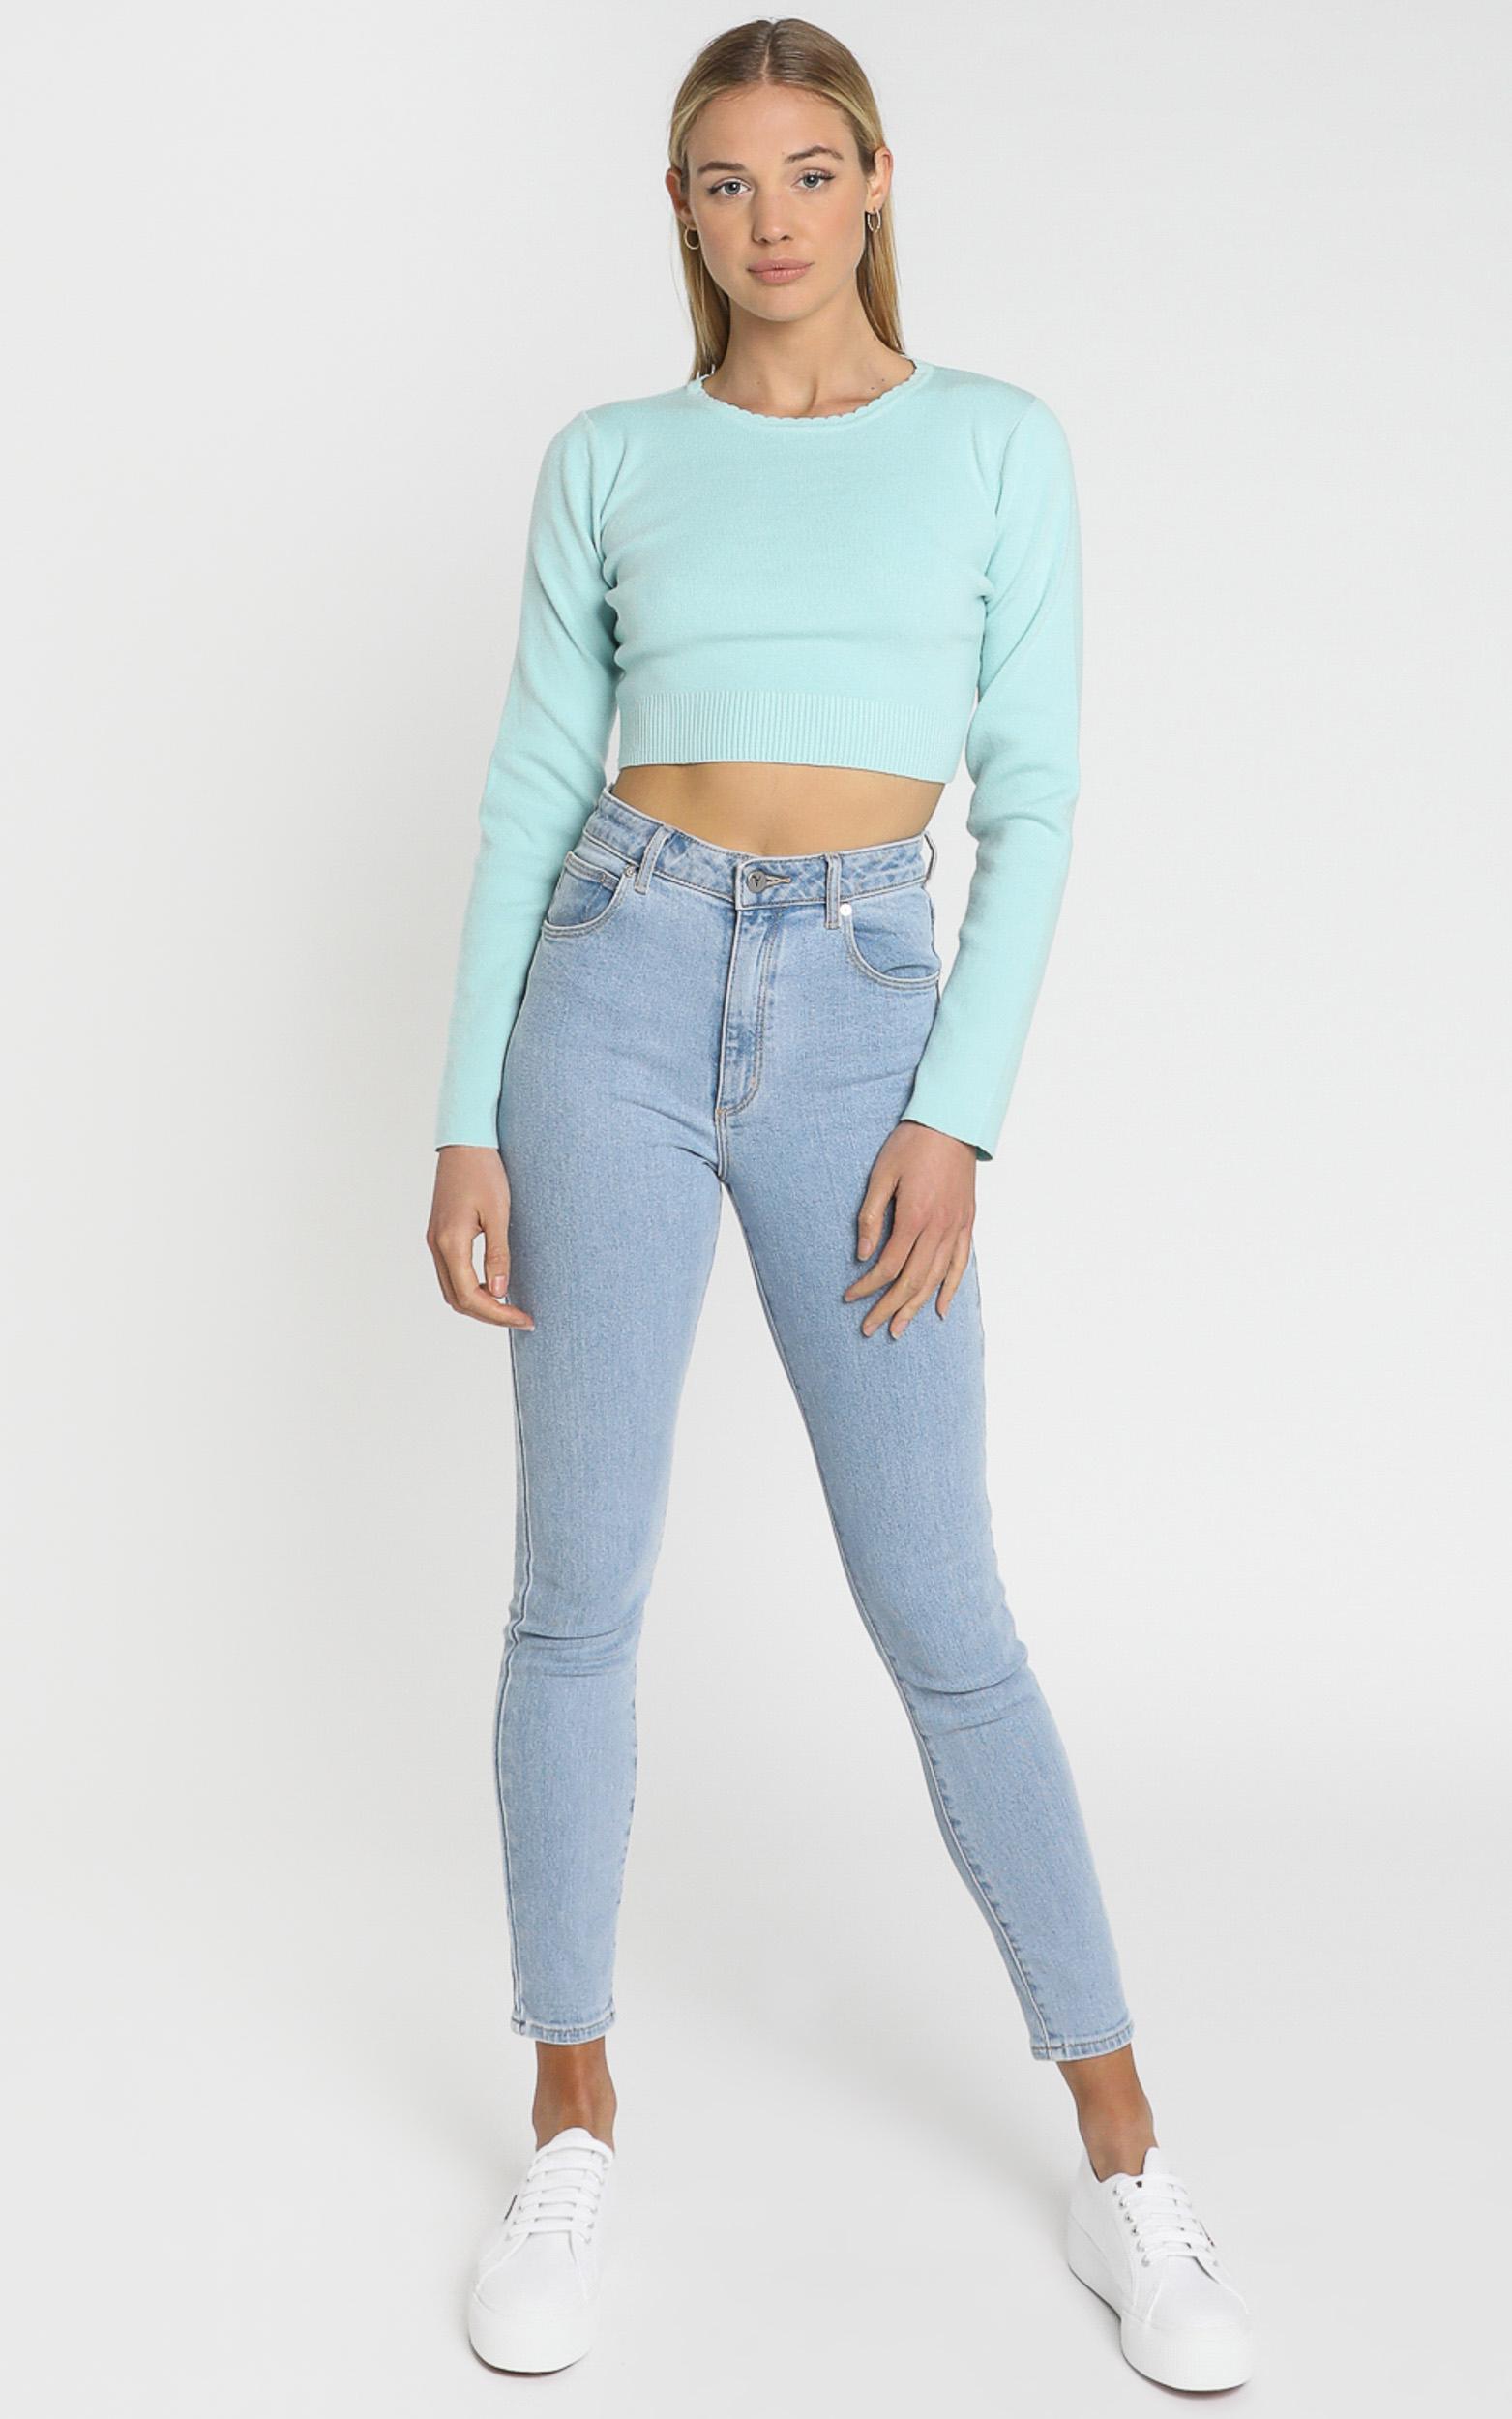 Amare Knit Top in Sea Blue - 8 (S), Blue, hi-res image number null